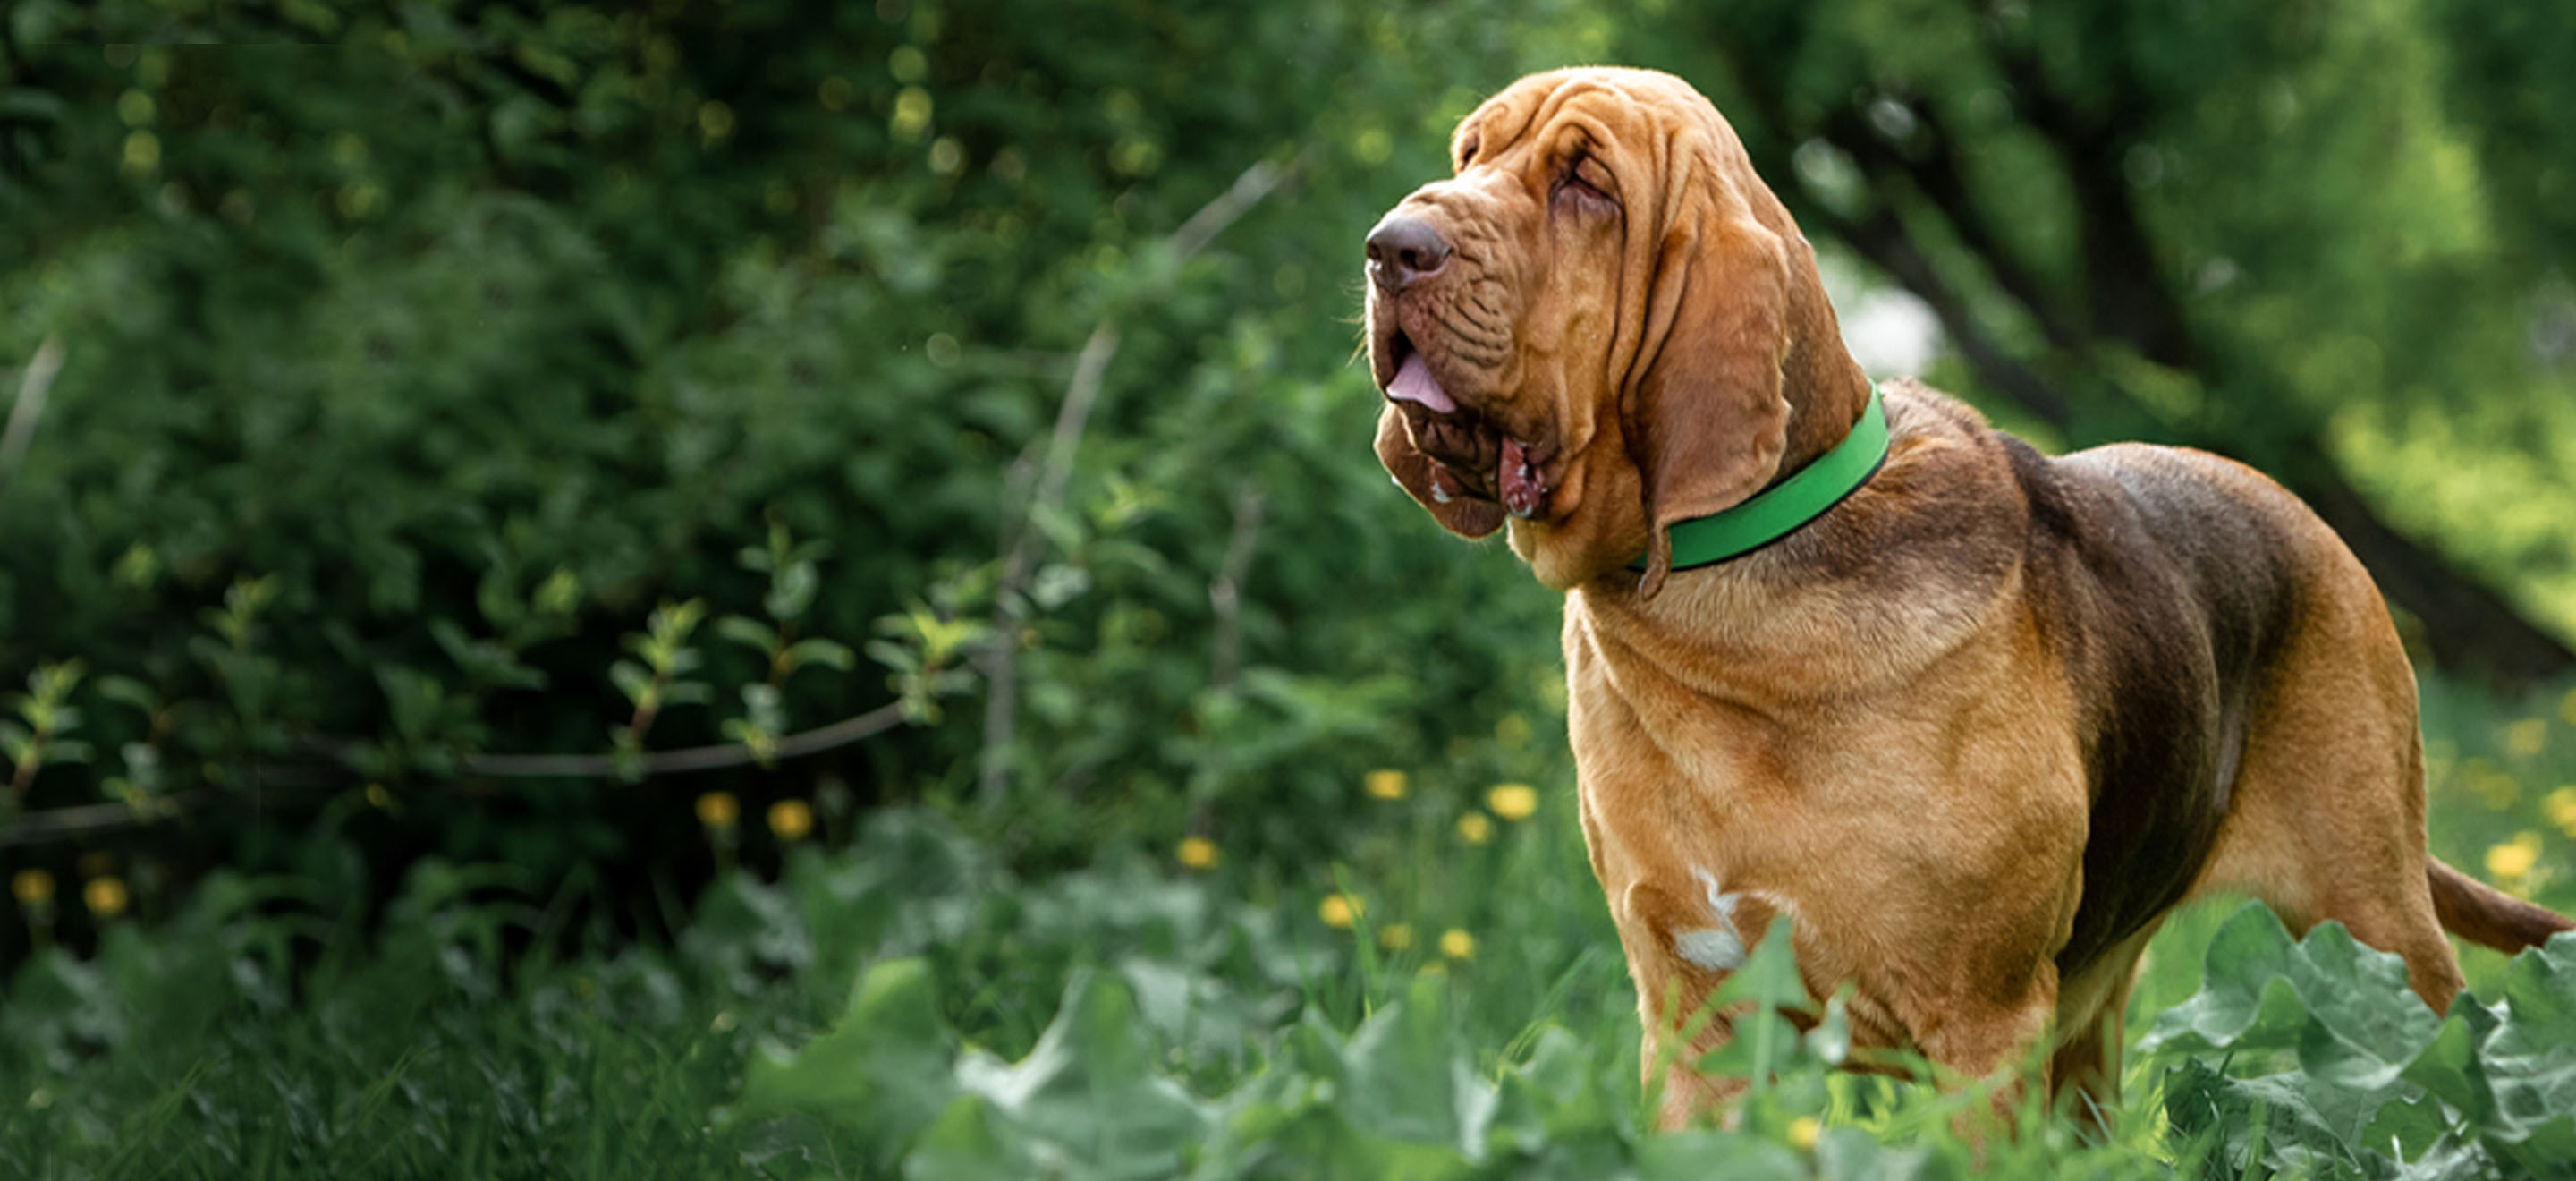 Happy bloodhound standing in the grass image